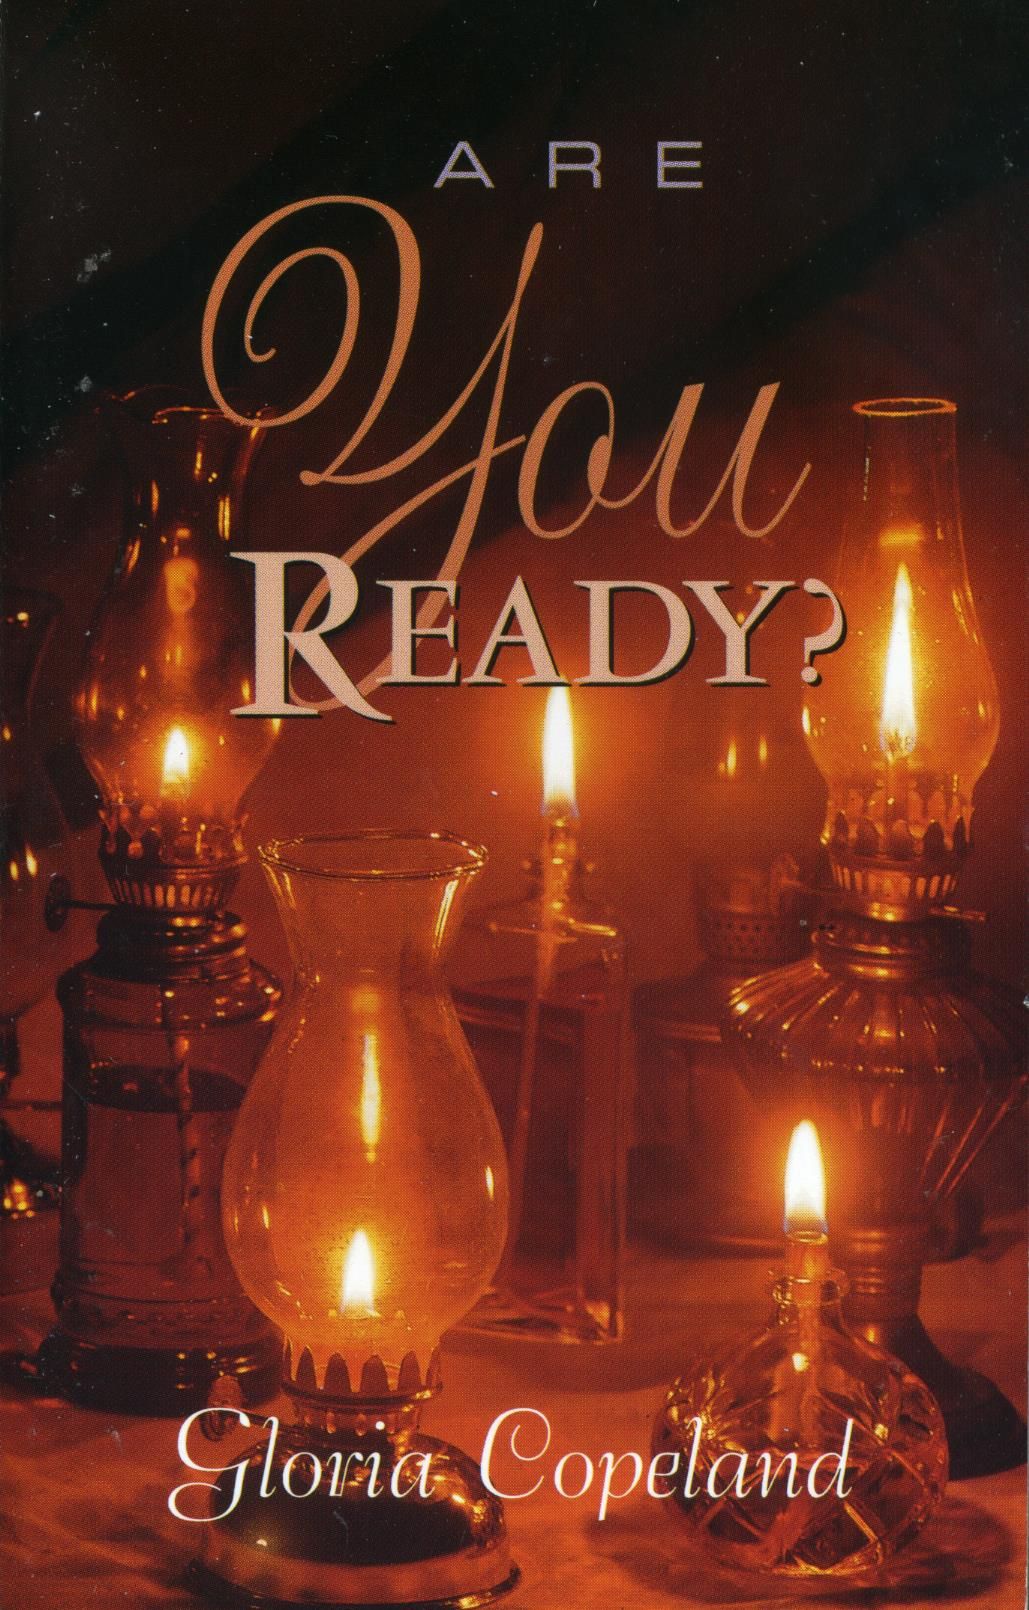 G. Copeland: Are you ready?